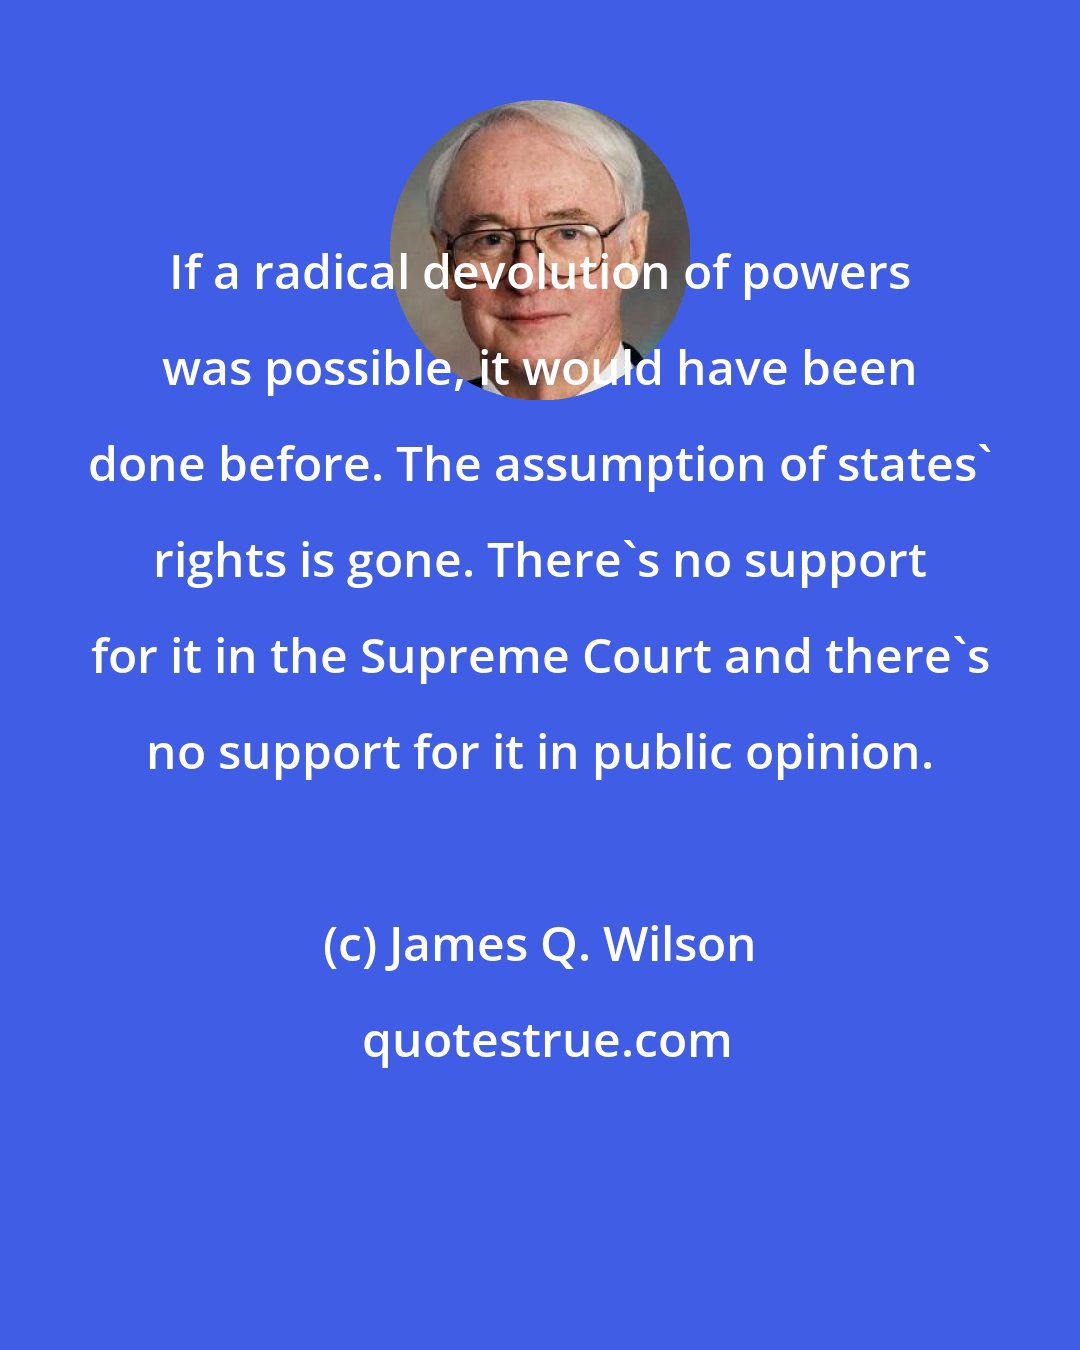 James Q. Wilson: If a radical devolution of powers was possible, it would have been done before. The assumption of states' rights is gone. There's no support for it in the Supreme Court and there's no support for it in public opinion.